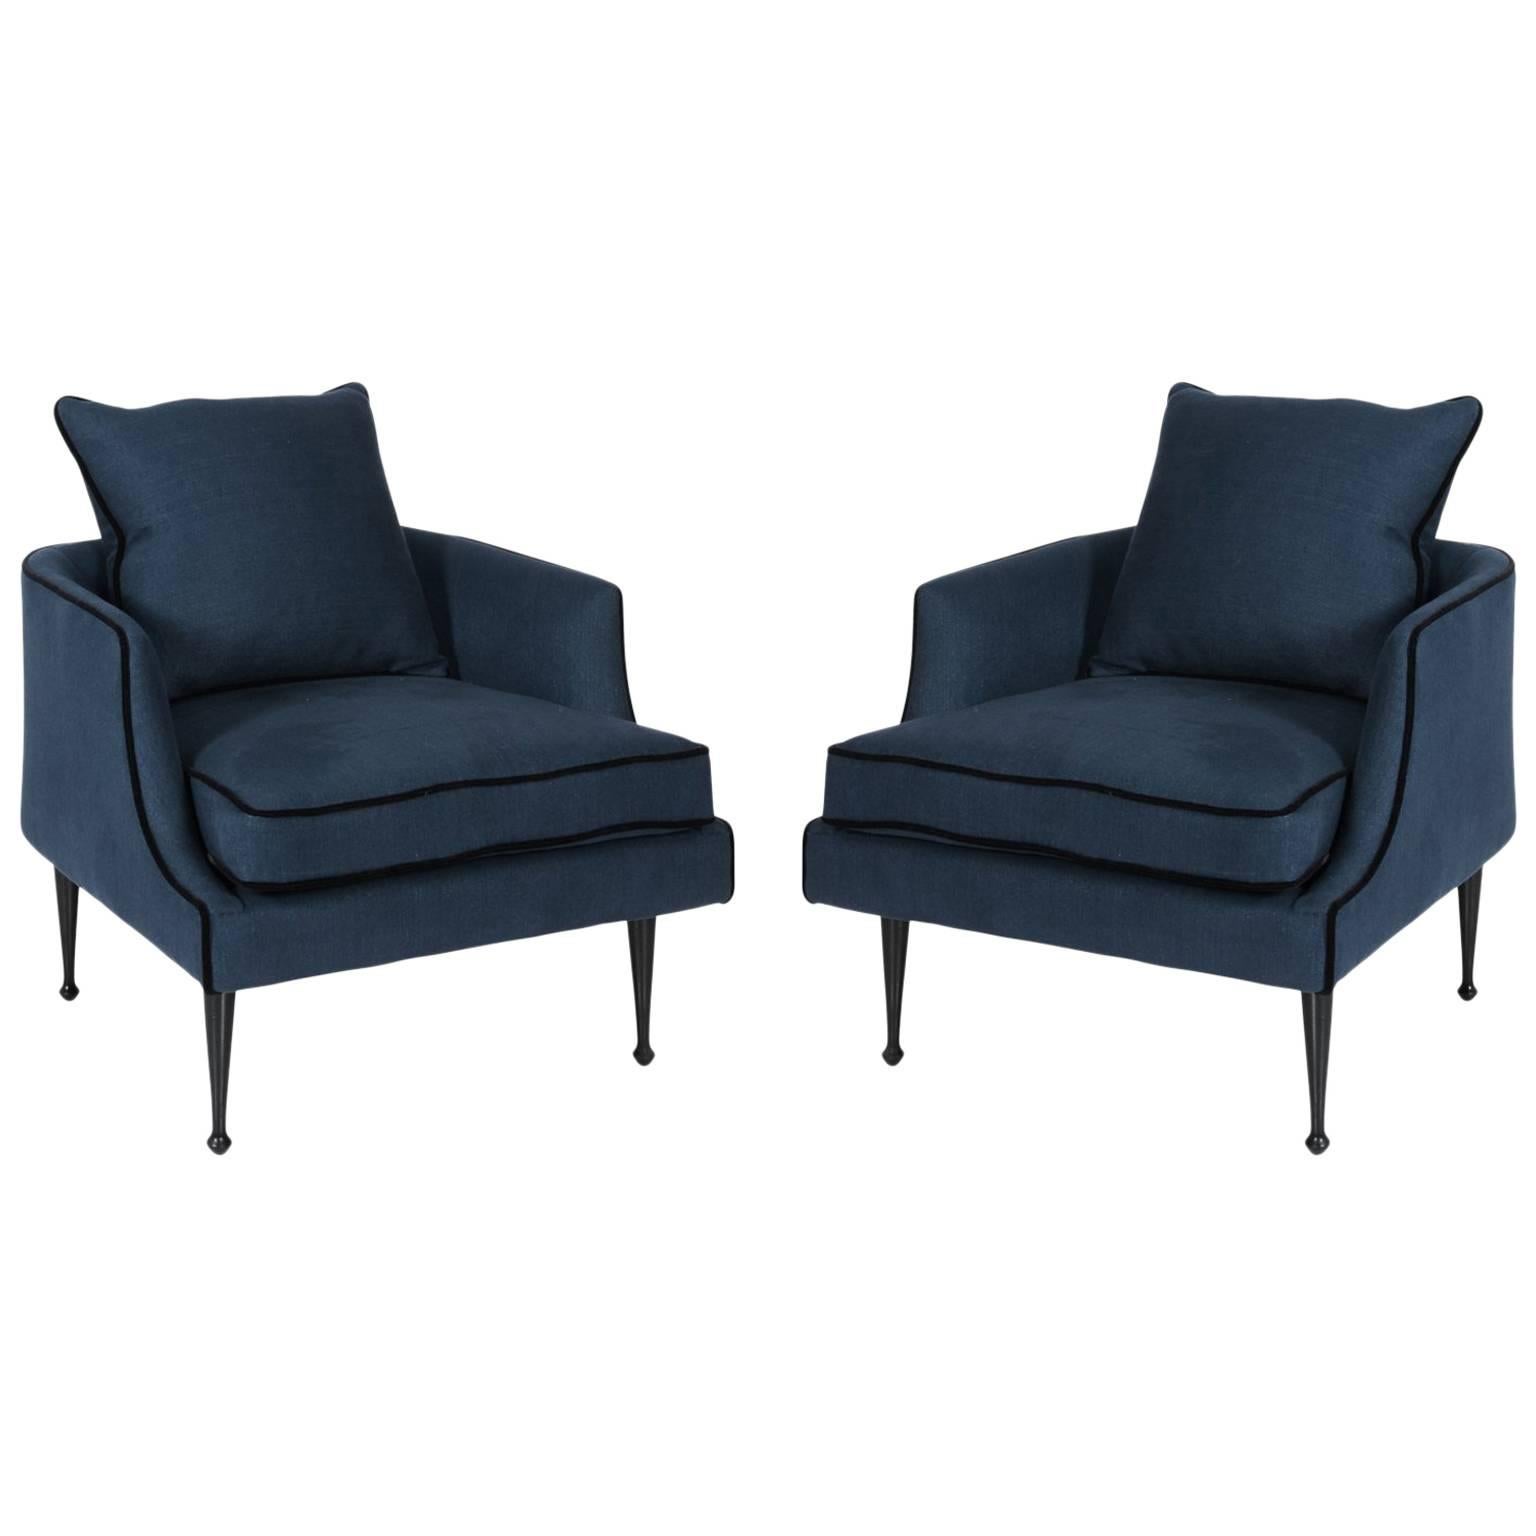 Pair of Rich Blue Linen Club Chairs For Sale